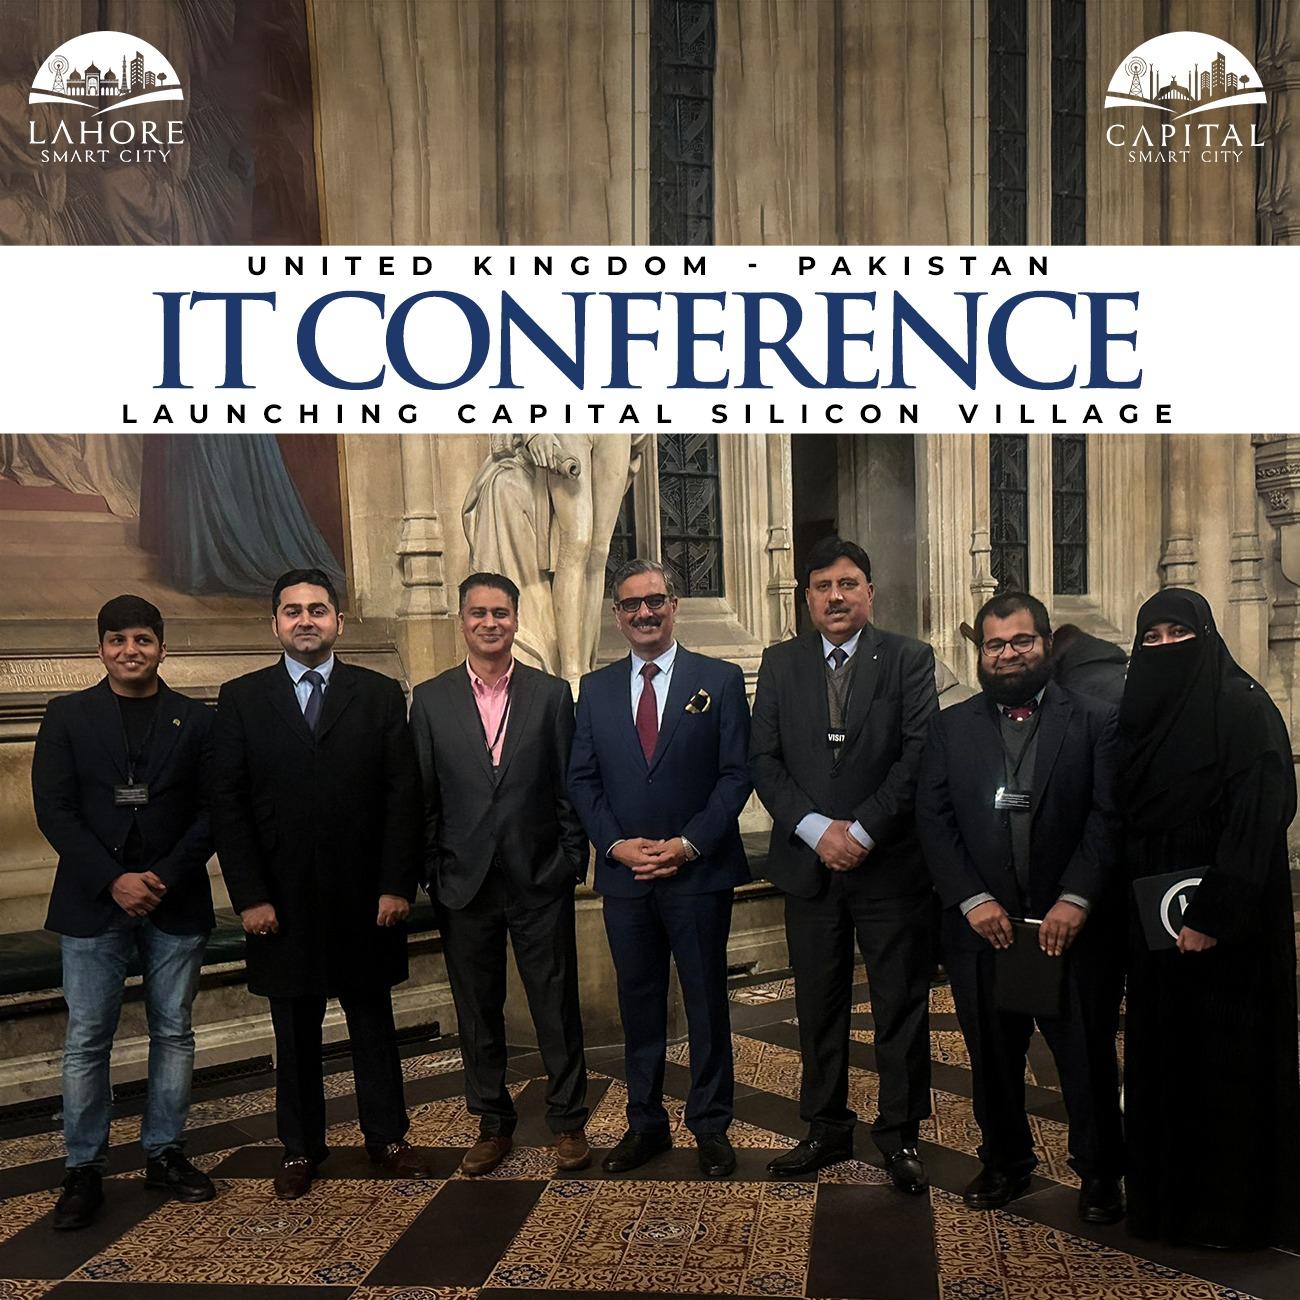 Exciting news from the UK-Pakistan IT conference